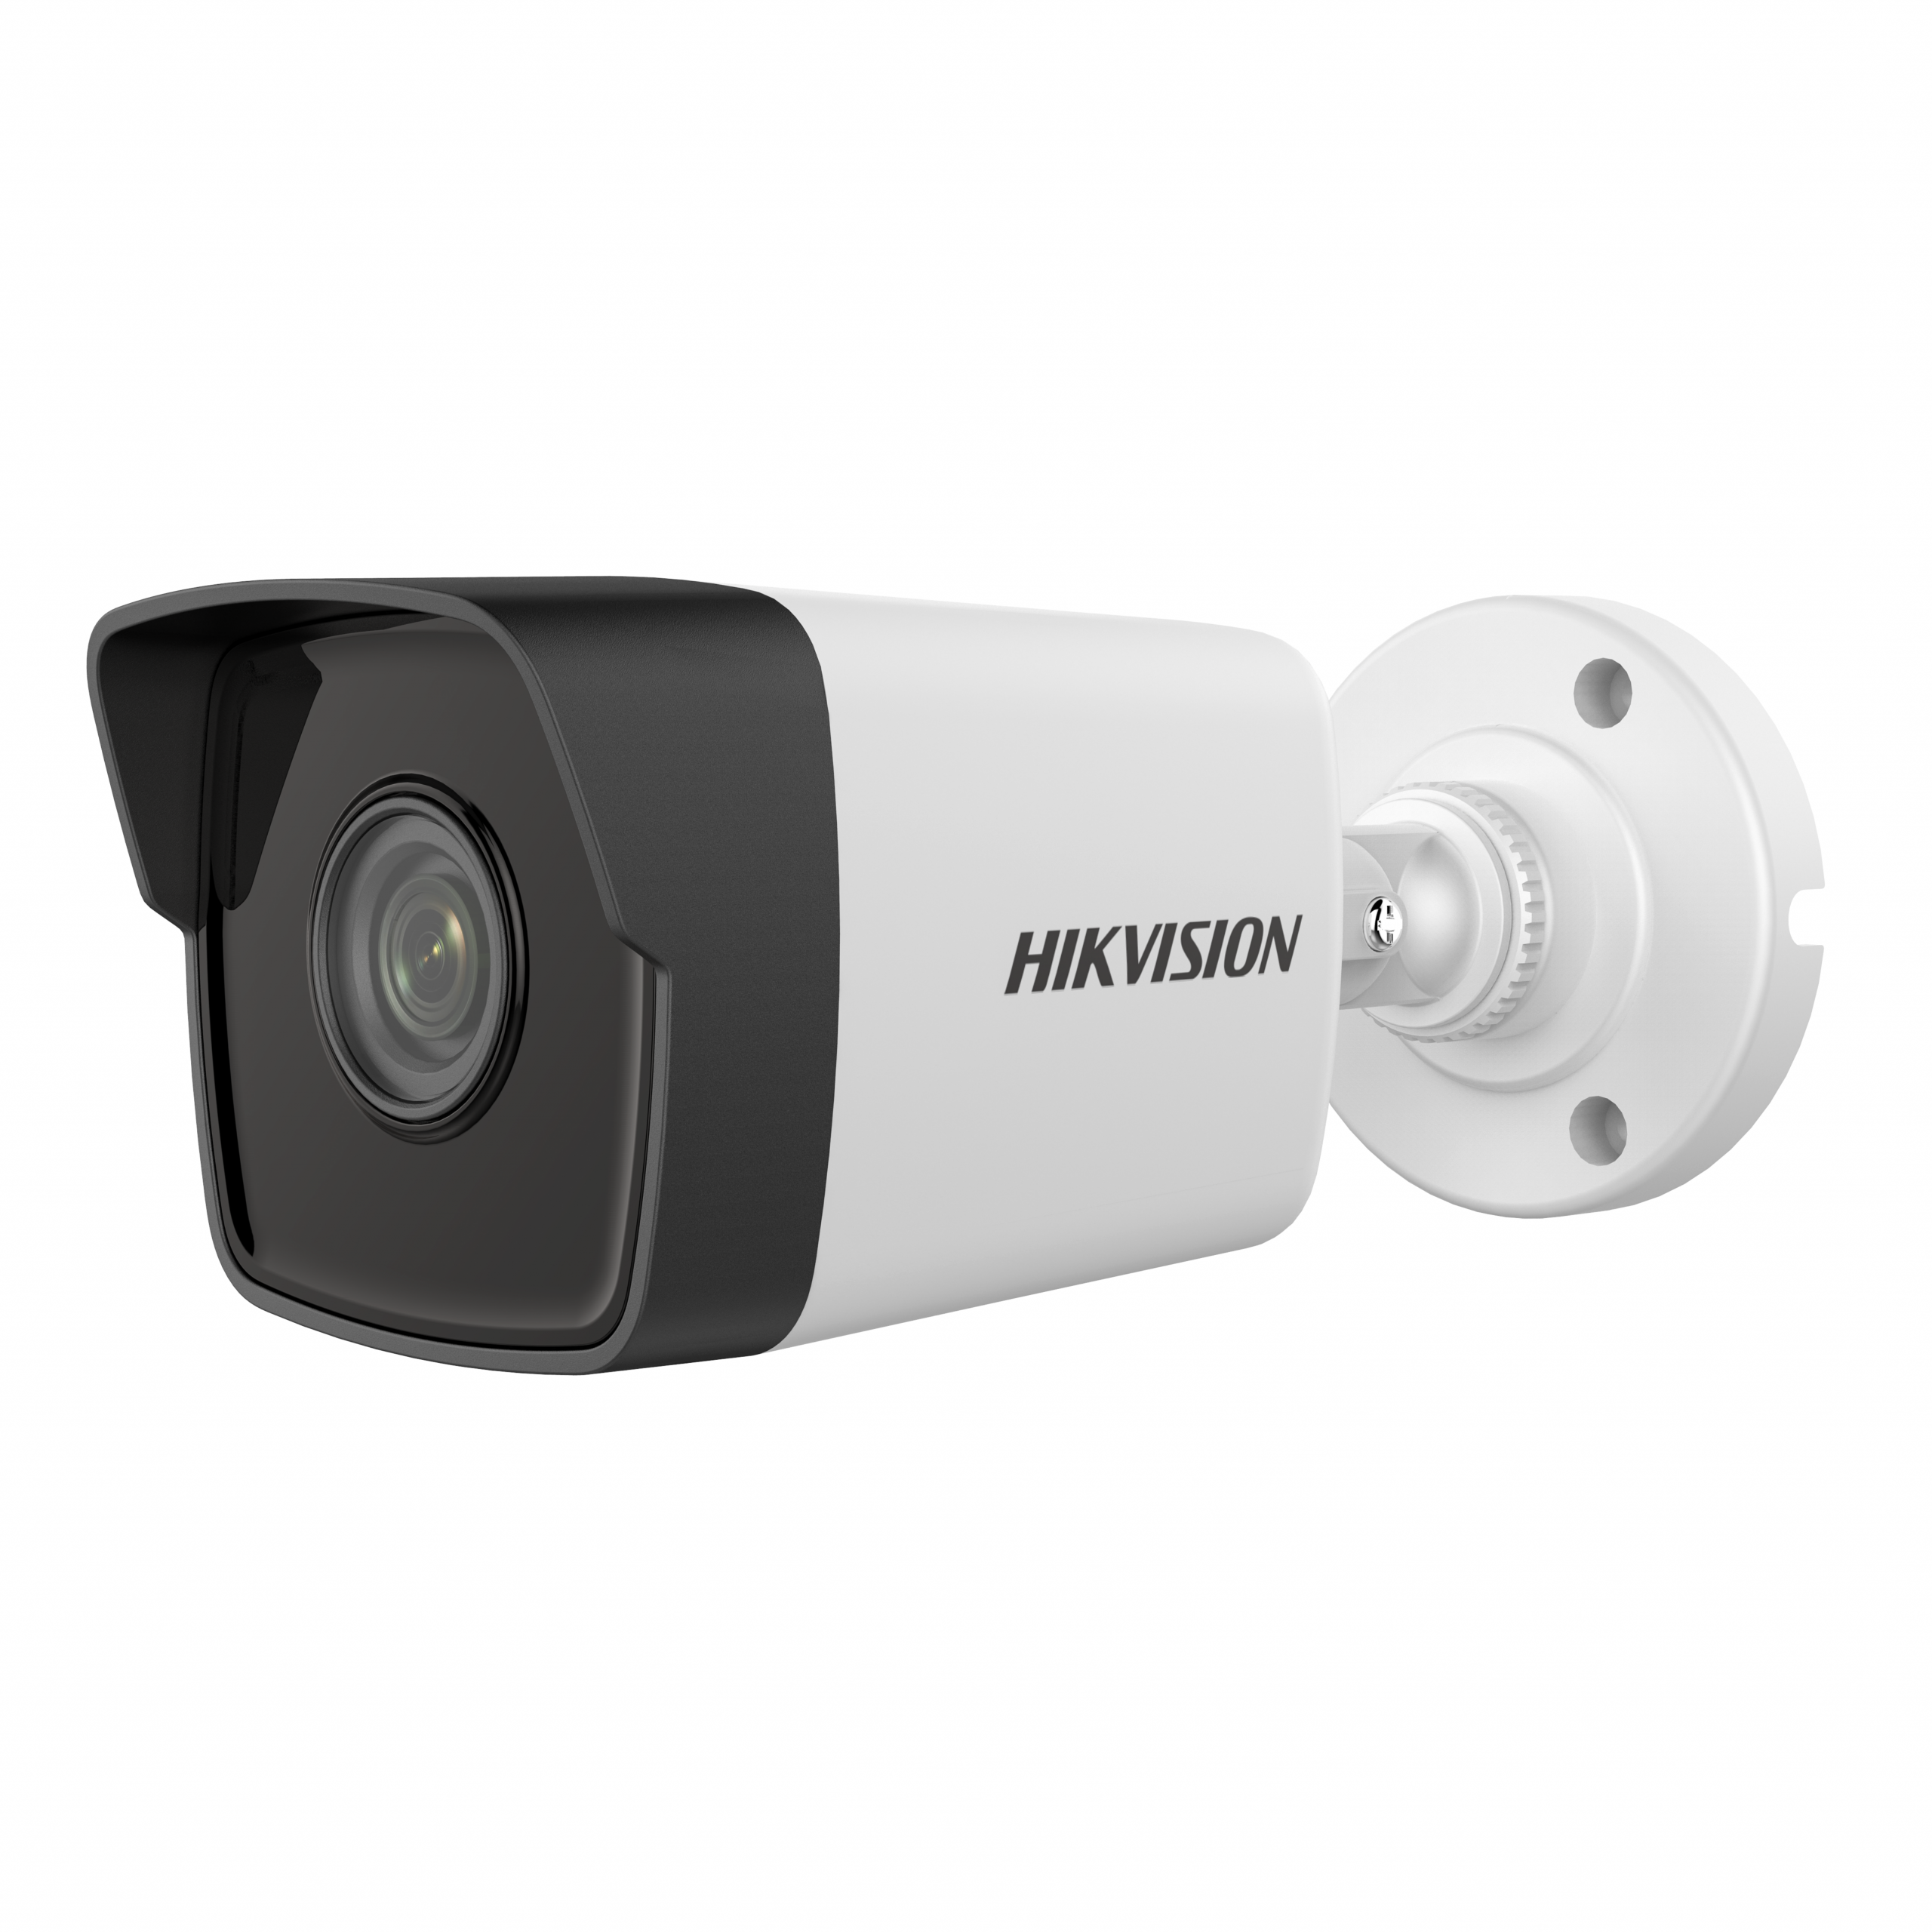 Hikvision 2MP w/Built-in Mic Bullet Network Camera